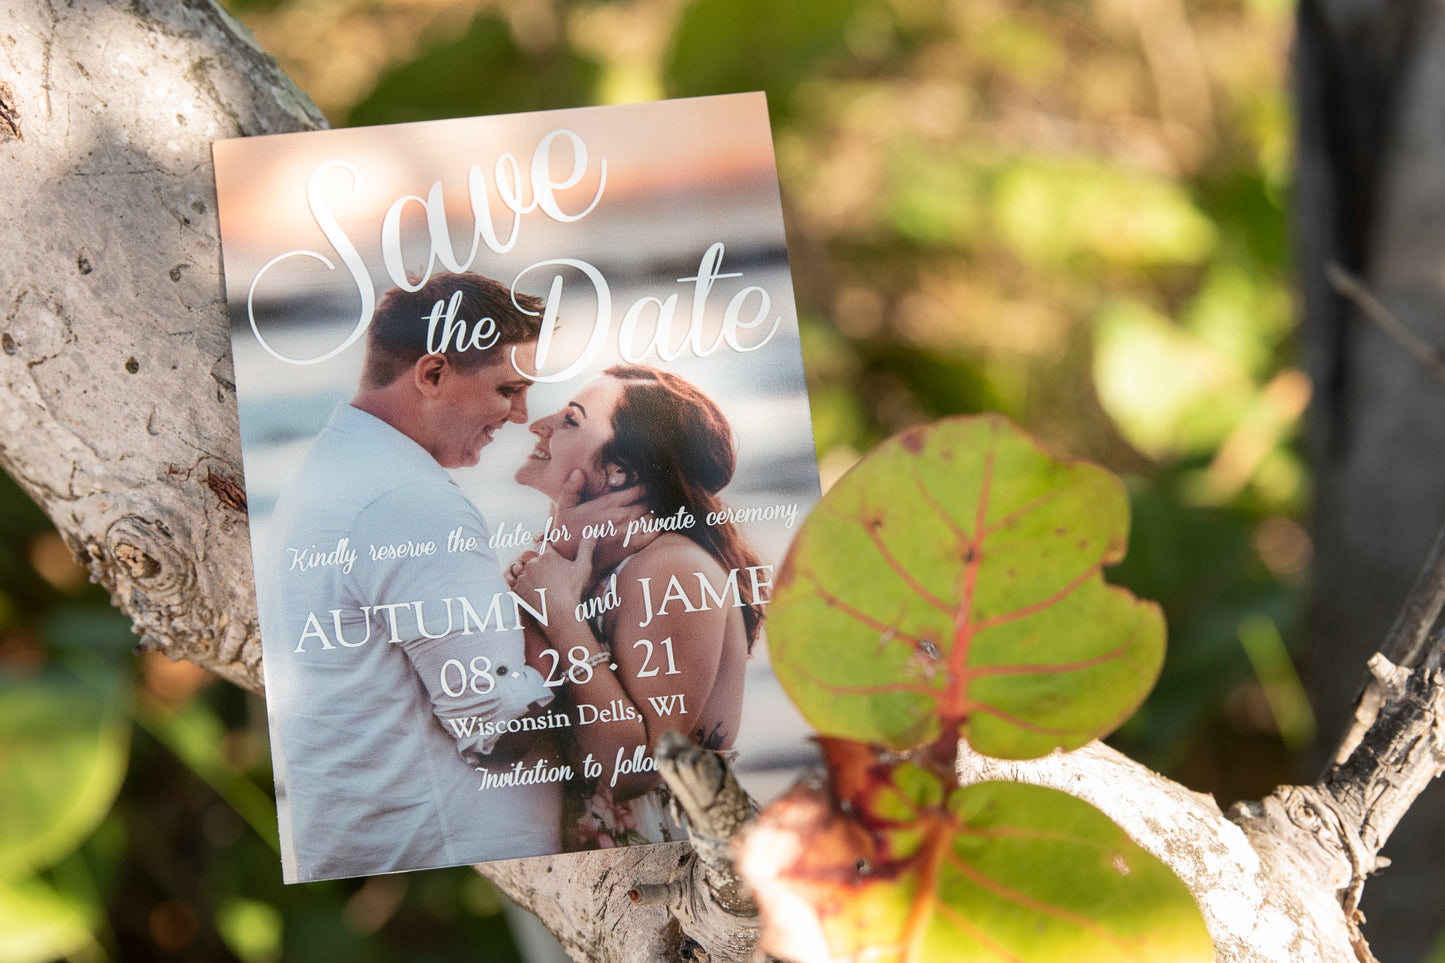 Personalized Acrylic Save the Date - Showcase Your Engagement Photos